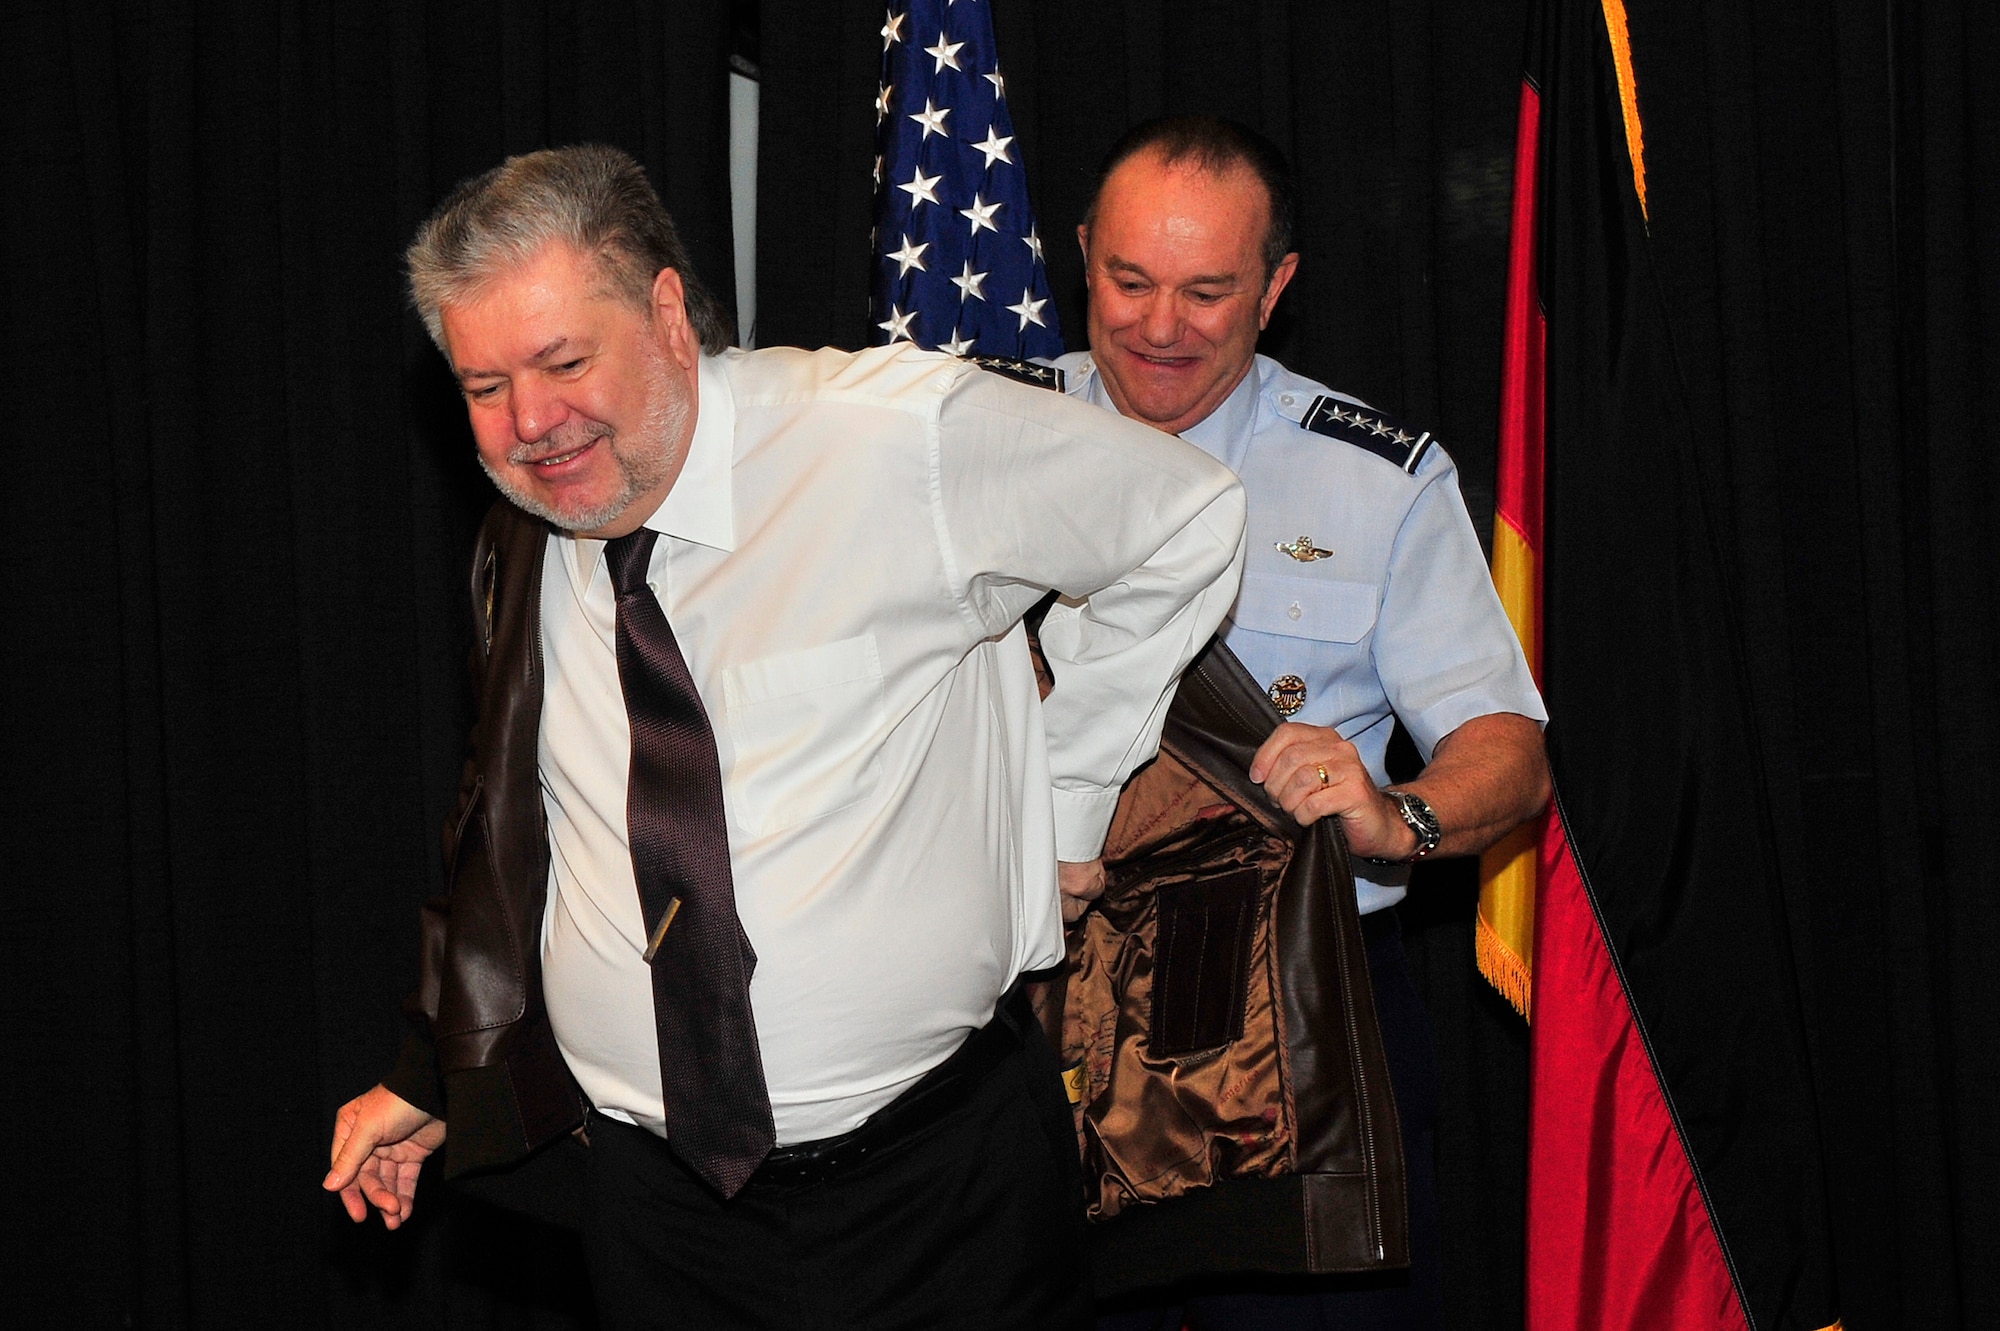 Gen. Philip M. Breedlove, United States Air Forces in Europe and Air Forces Africa commander, assists former Minister President Kurt Beck with putting his flight jacket on during Beck’s U.S. Air Forces in Europe Medal of Distinction ceremony on Ramstein Air Base, Germany, March 8, 2013.  The USAFE Medal of Distinction is awarded to non-U.S. citizens in recognition of extraordinary service, achievements, or support to the accomplishment of the mission of USAFE. (U.S. Air Force photo/Senior Airman Aaron-Forrest Wainwright)